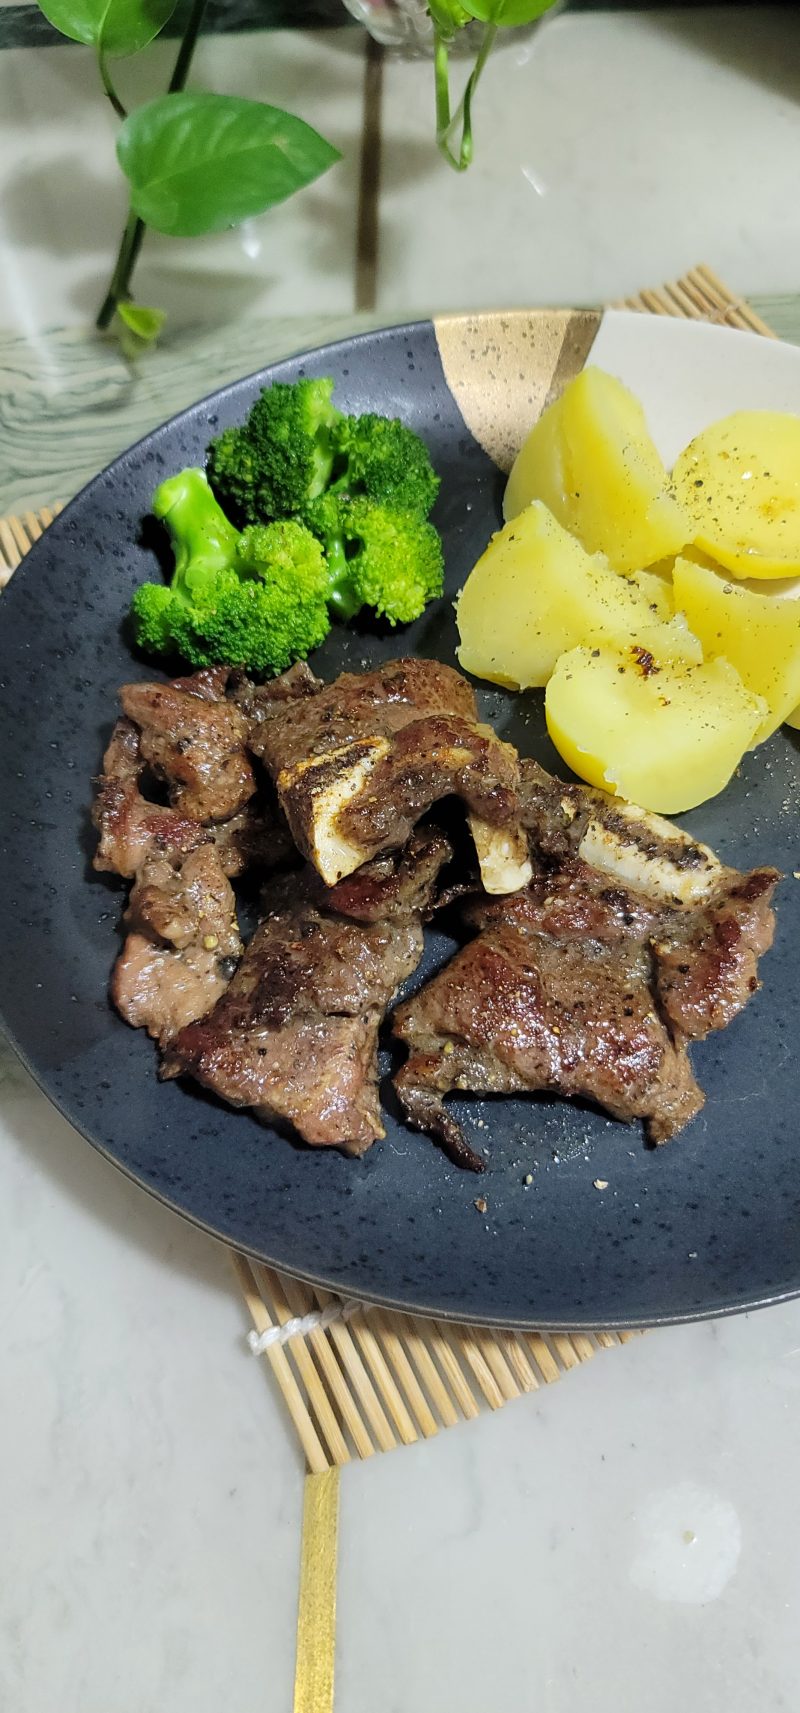 Steps for Cooking Pan-fried Cowboy Steak